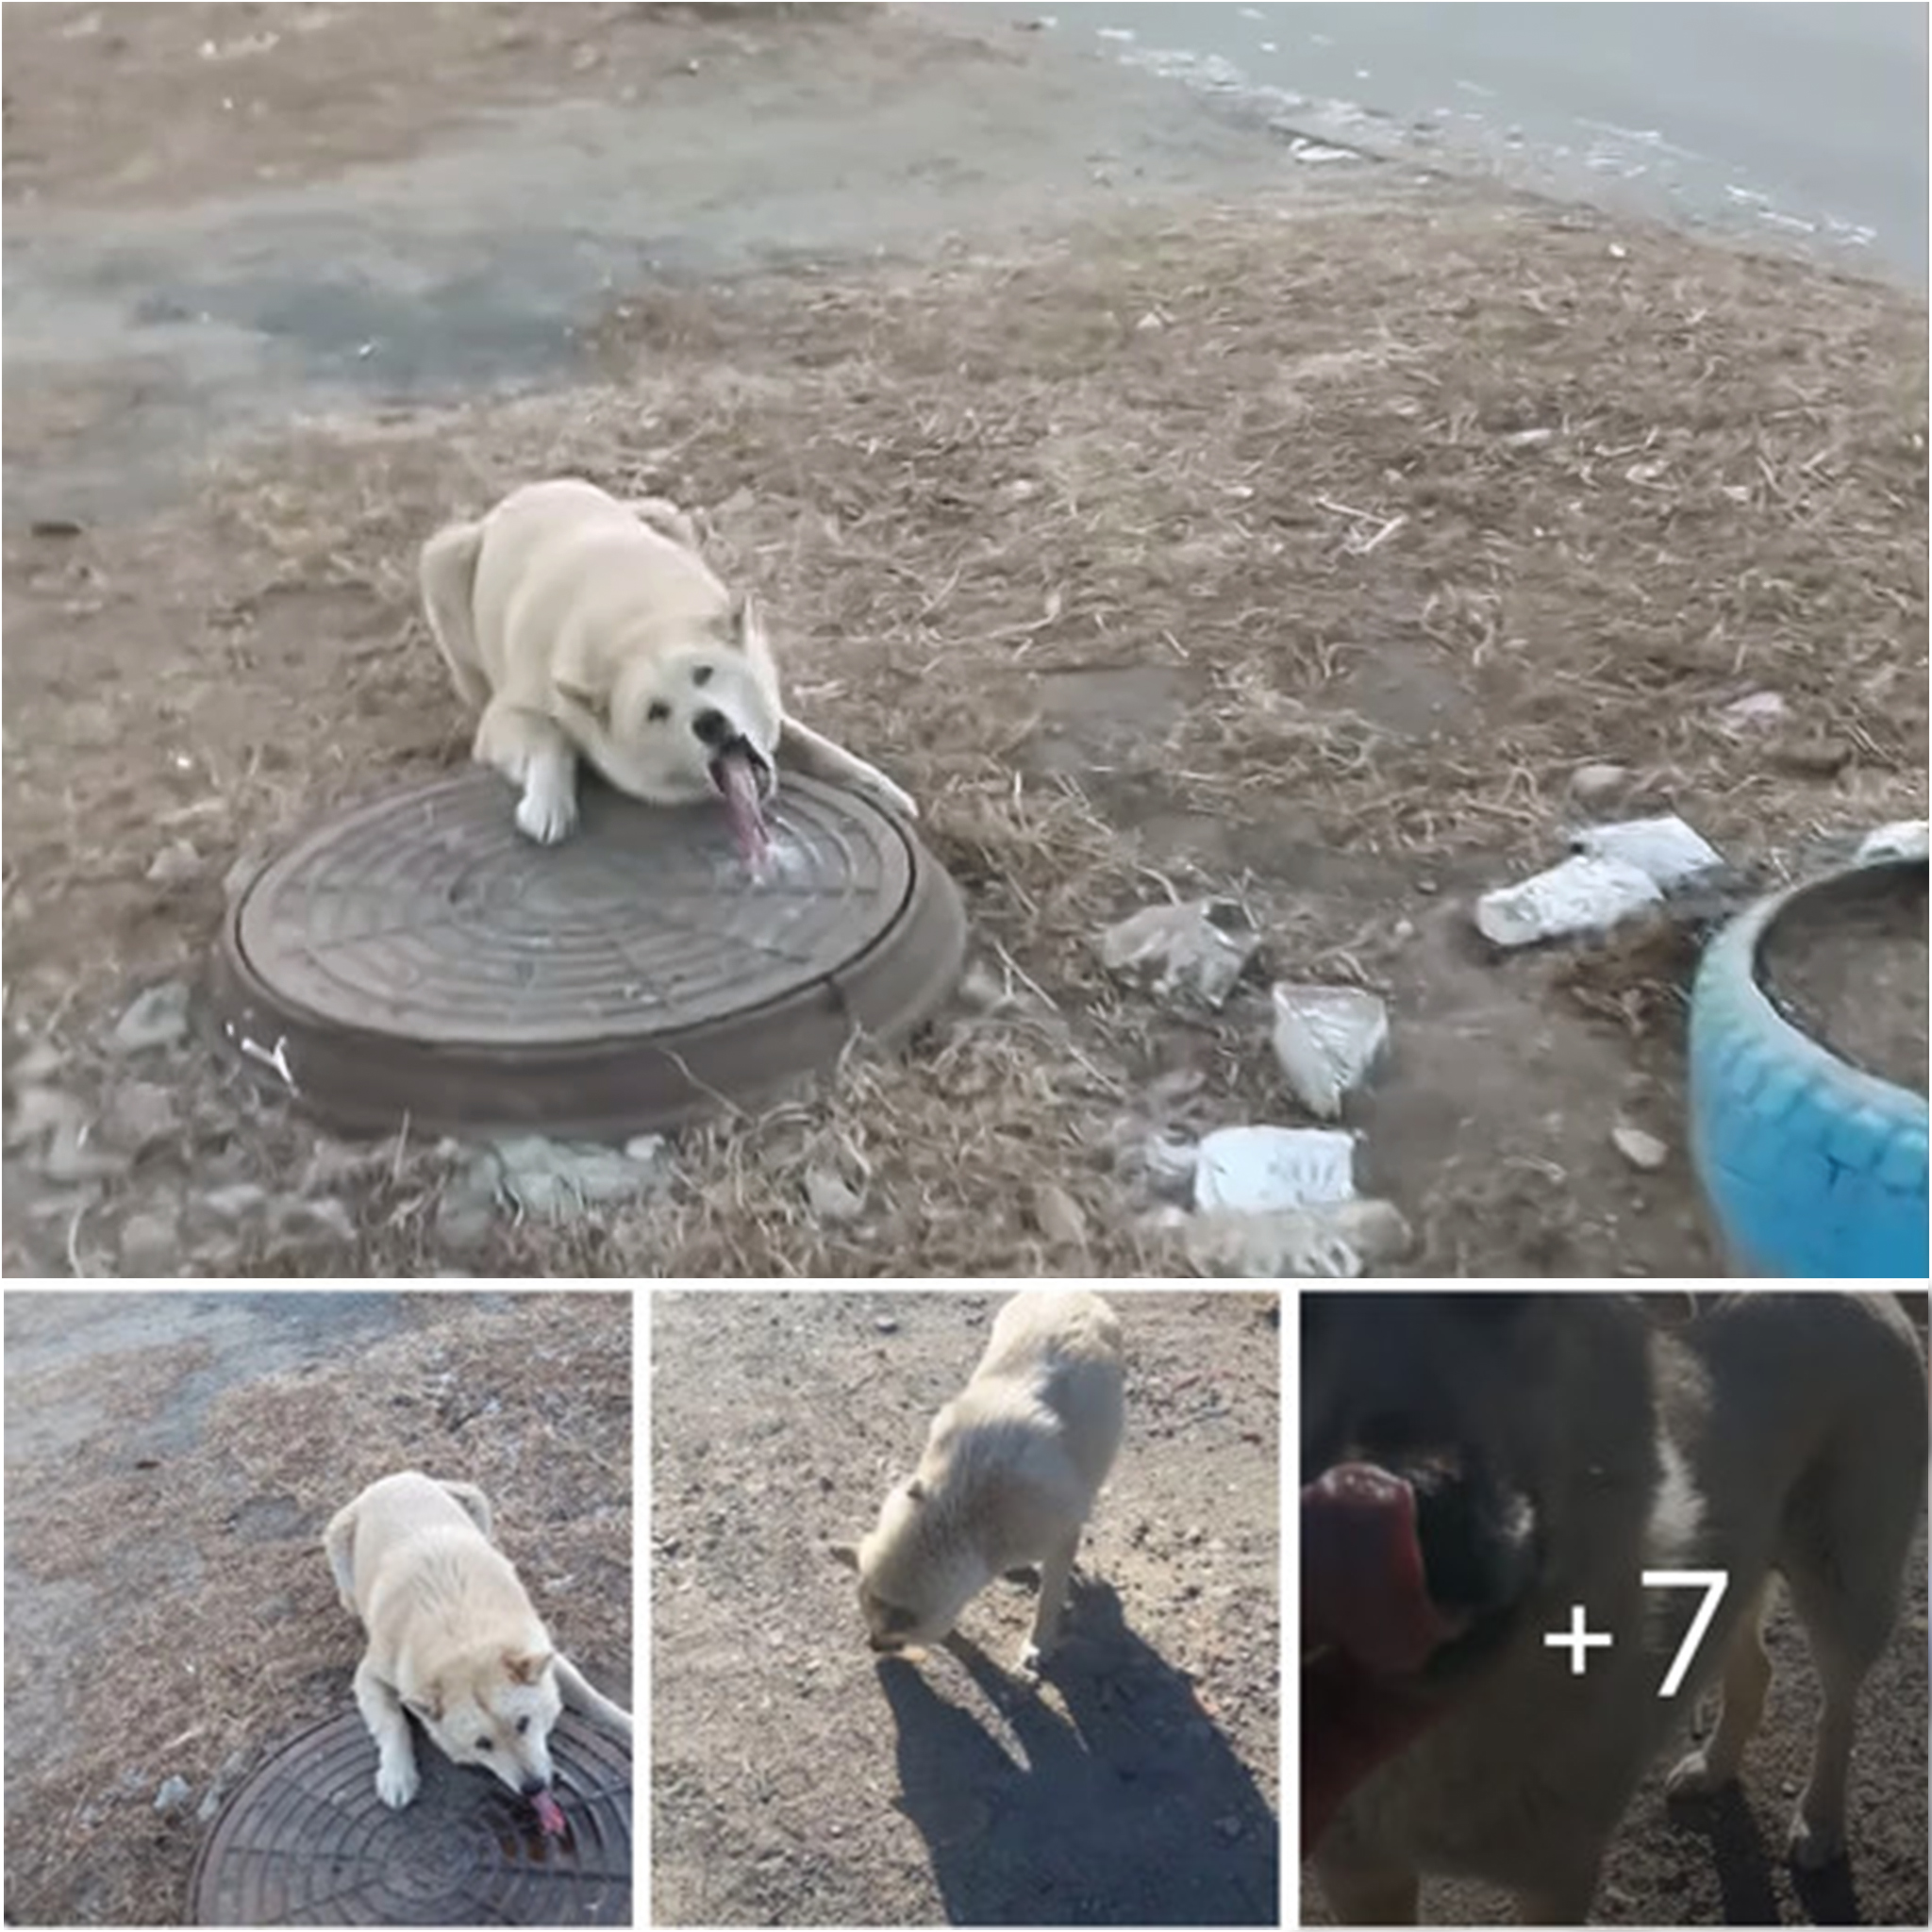 “Icy Manhole Hero: Man Rescues Dog Whose Tongue Was Frozen in Peril, Proving the Unbreakable Bond Between Humans and Their Furry Companions”